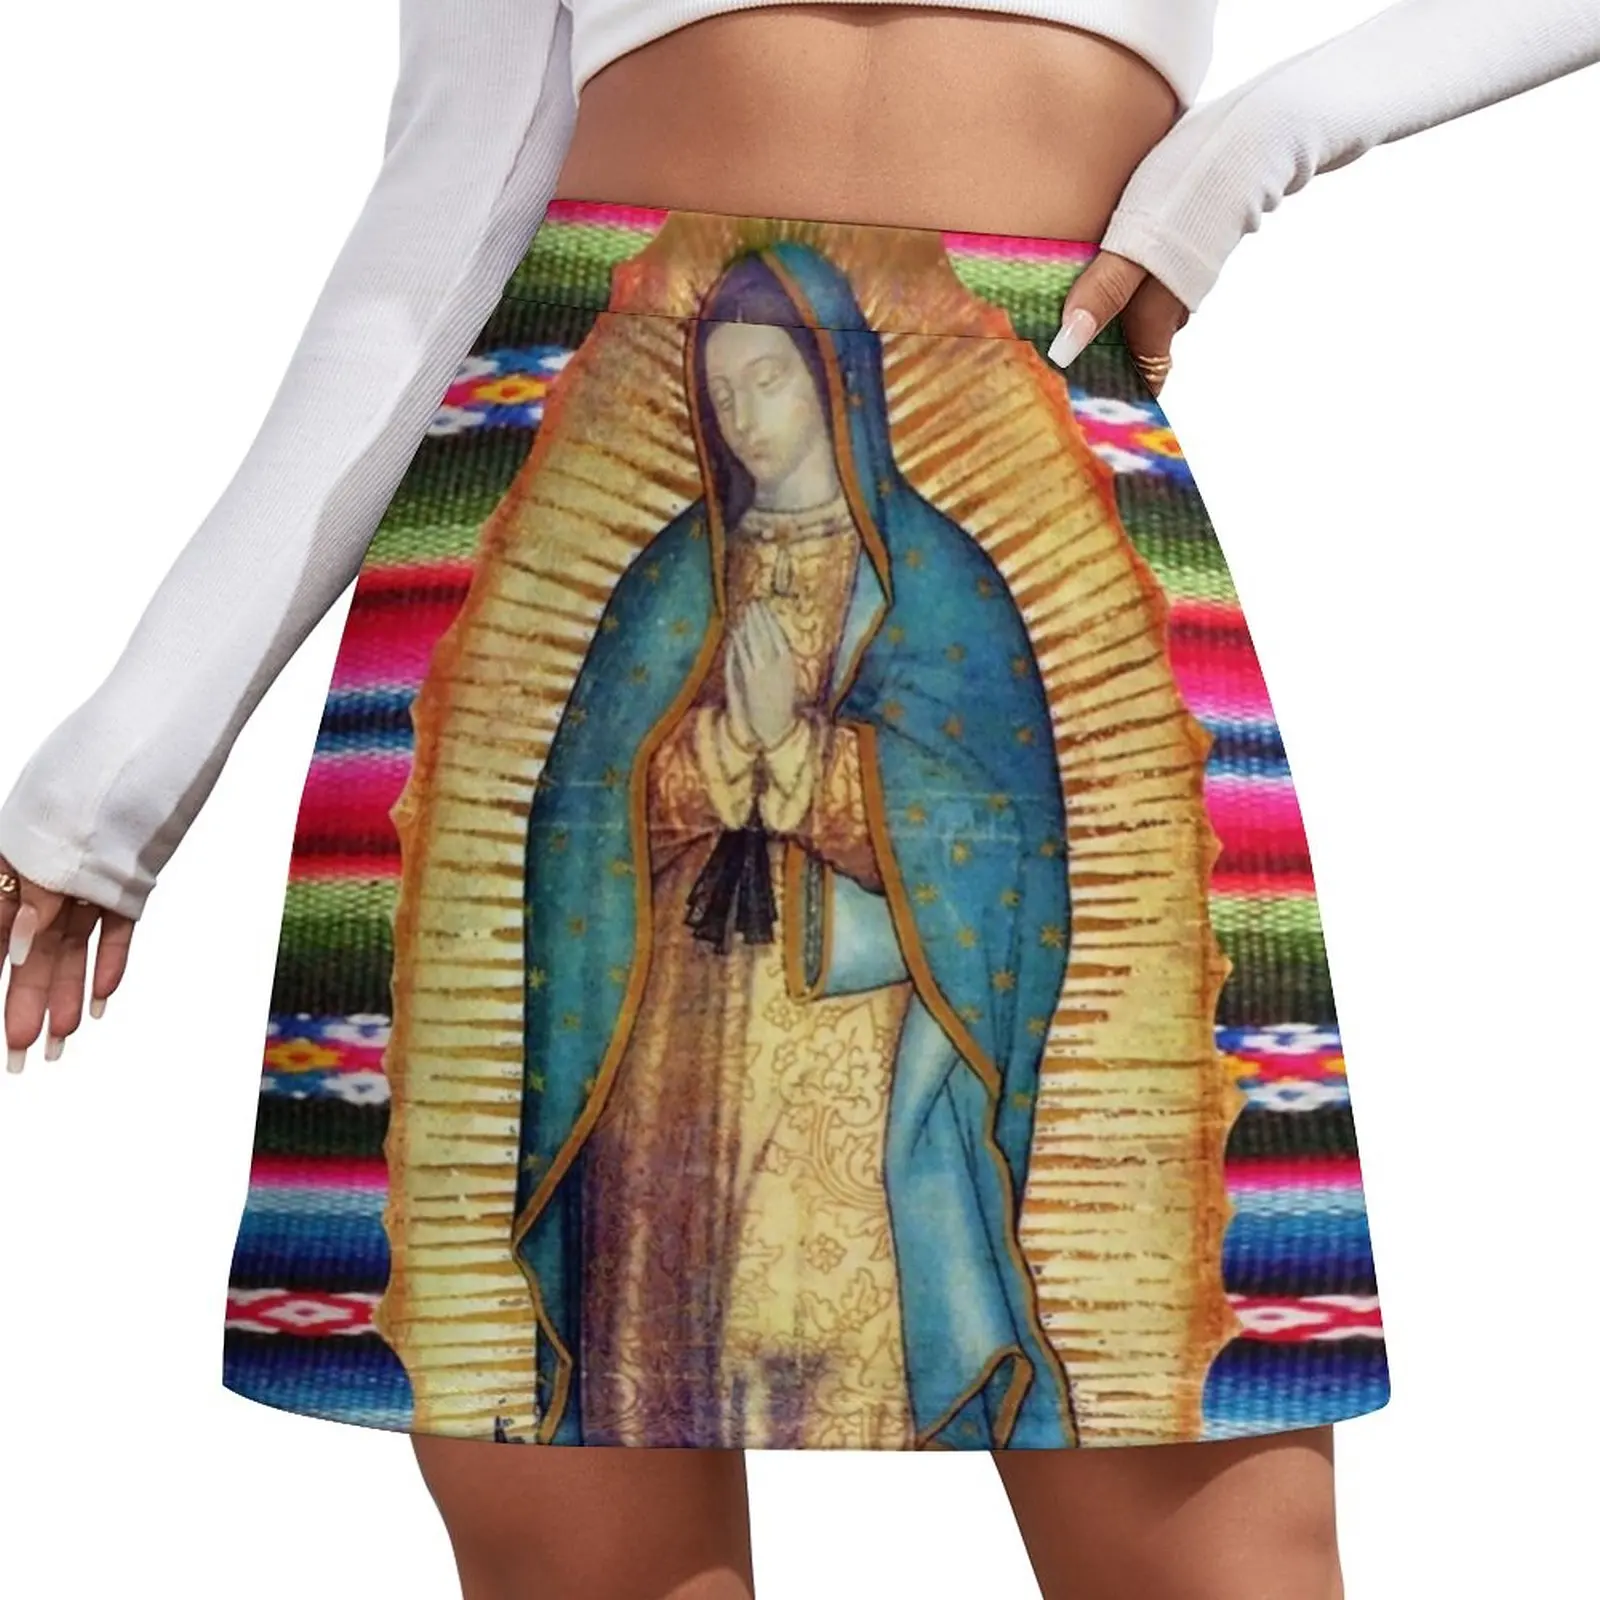 

Virgin Mary Catholic Skirt Our Lady of Guadalupe Street Wear Casual Skirts Vintage Mini Skirt Design Bottoms Birthday Present